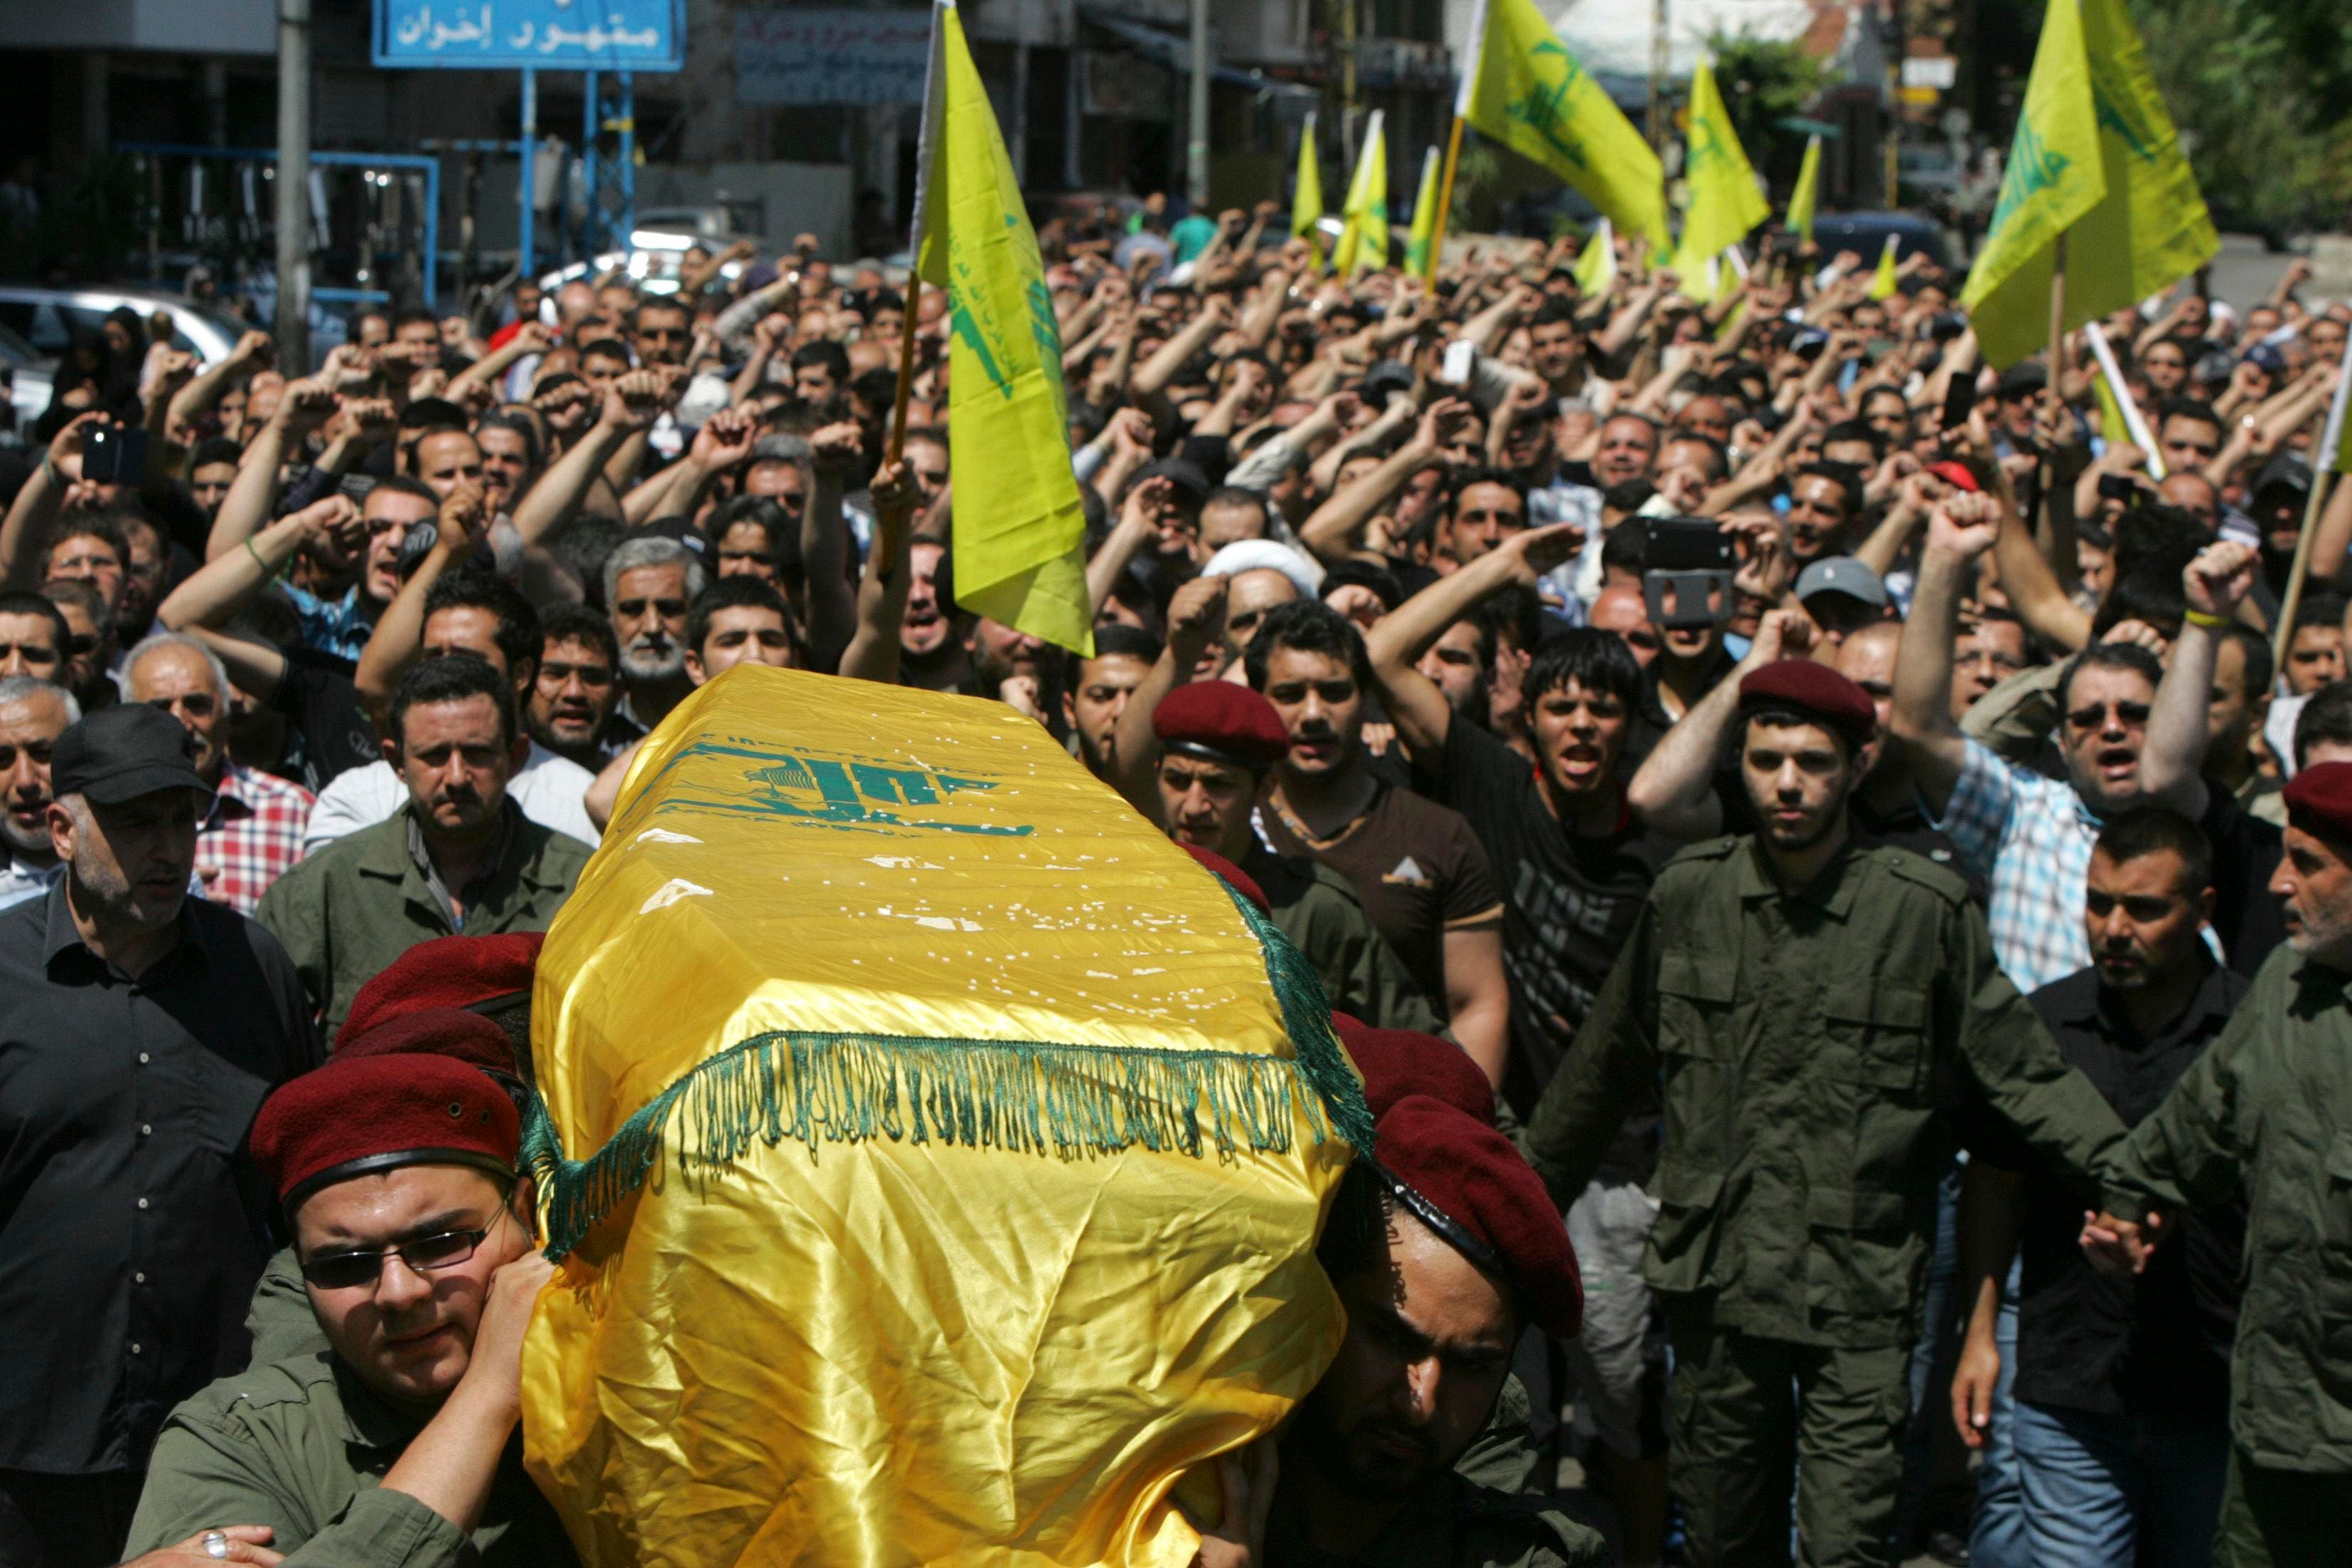 Supporters of Hezbollah and relatives of Hezbollah member Hussein Ahmad Abu Hasan carry his coffin during his funeral in Beirut’s suburbs May 21, 2013. (Reuters)